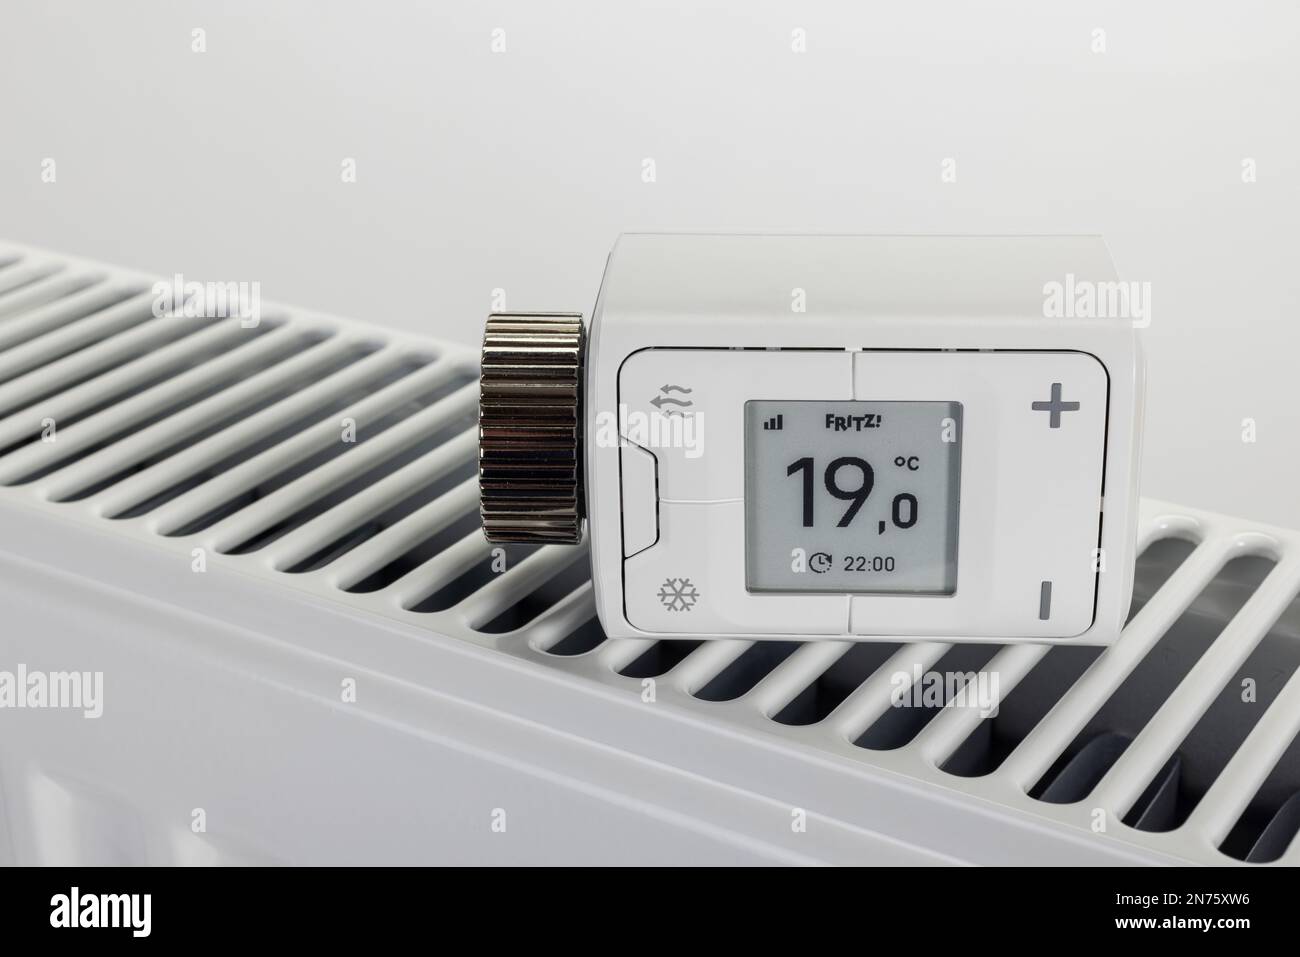 WLAN radiator thermostat FRITZ! DECT 302, display shows 1ö°C., on radiator,  symbol image, change thermostat, smart home technology, networking,  digital, energy costs, rising heating costs, white background Stock Photo -  Alamy